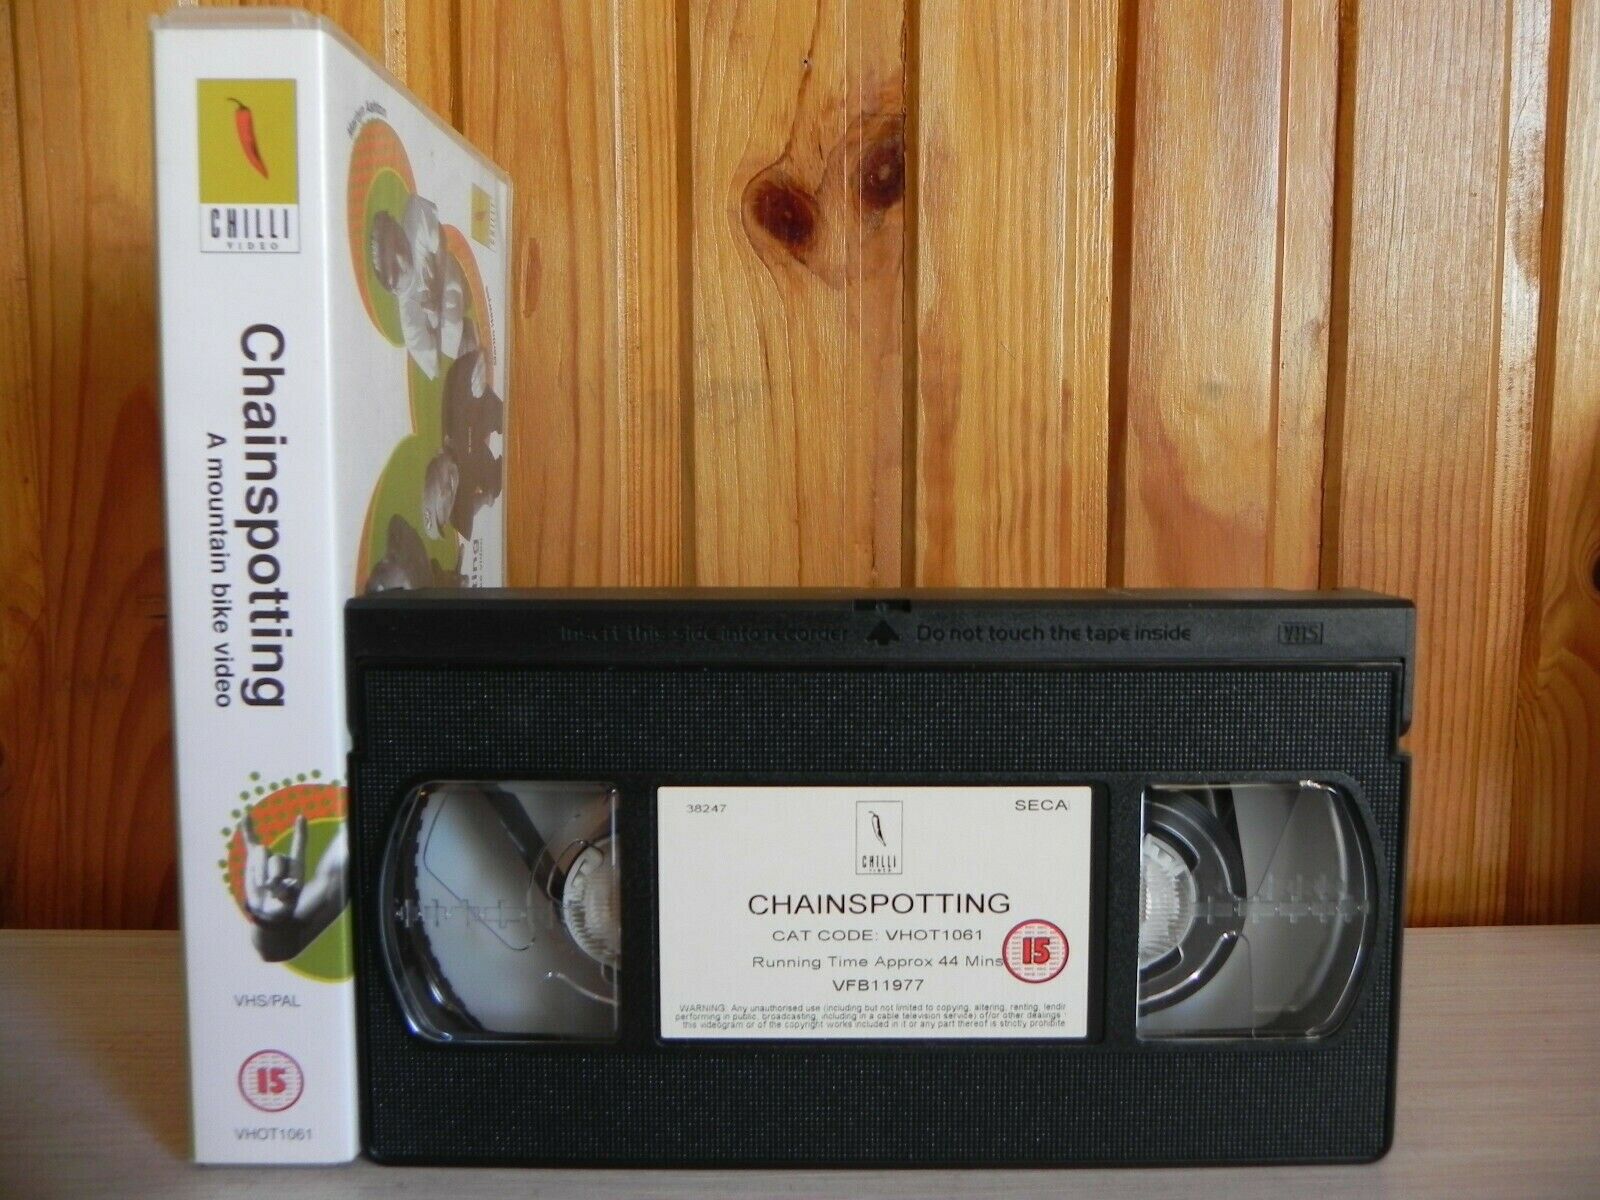 Chainspotting - A Mountain Bike Video - A Ride For The Soul - Raw And Live - VHS-